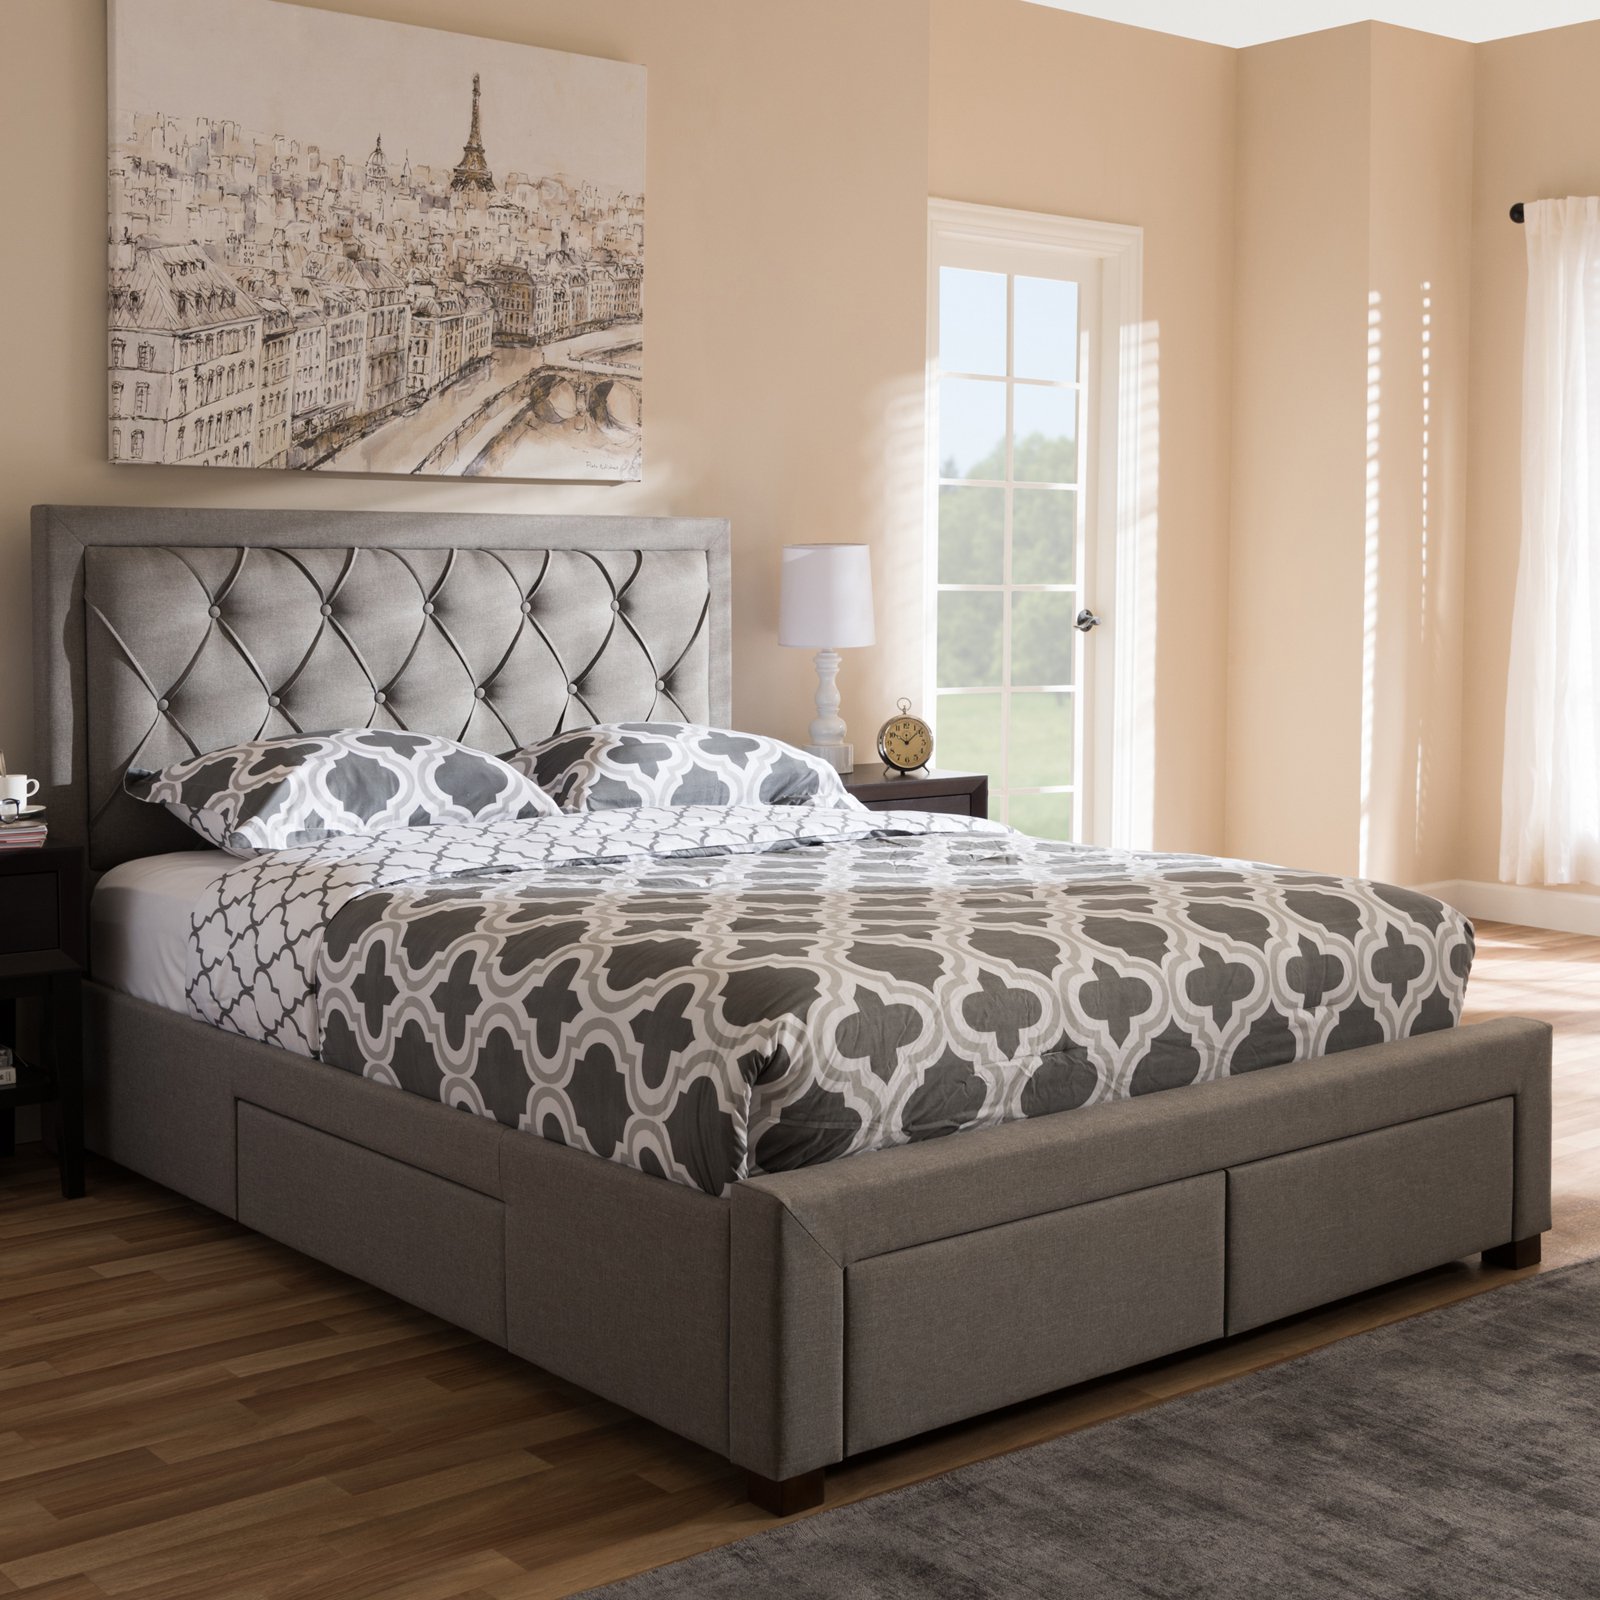 Baxton Studio Aurelie Modern and Contemporary Fabric Upholstered Storage Bed, Multiple Colors, Multiple Sizes - image 1 of 2